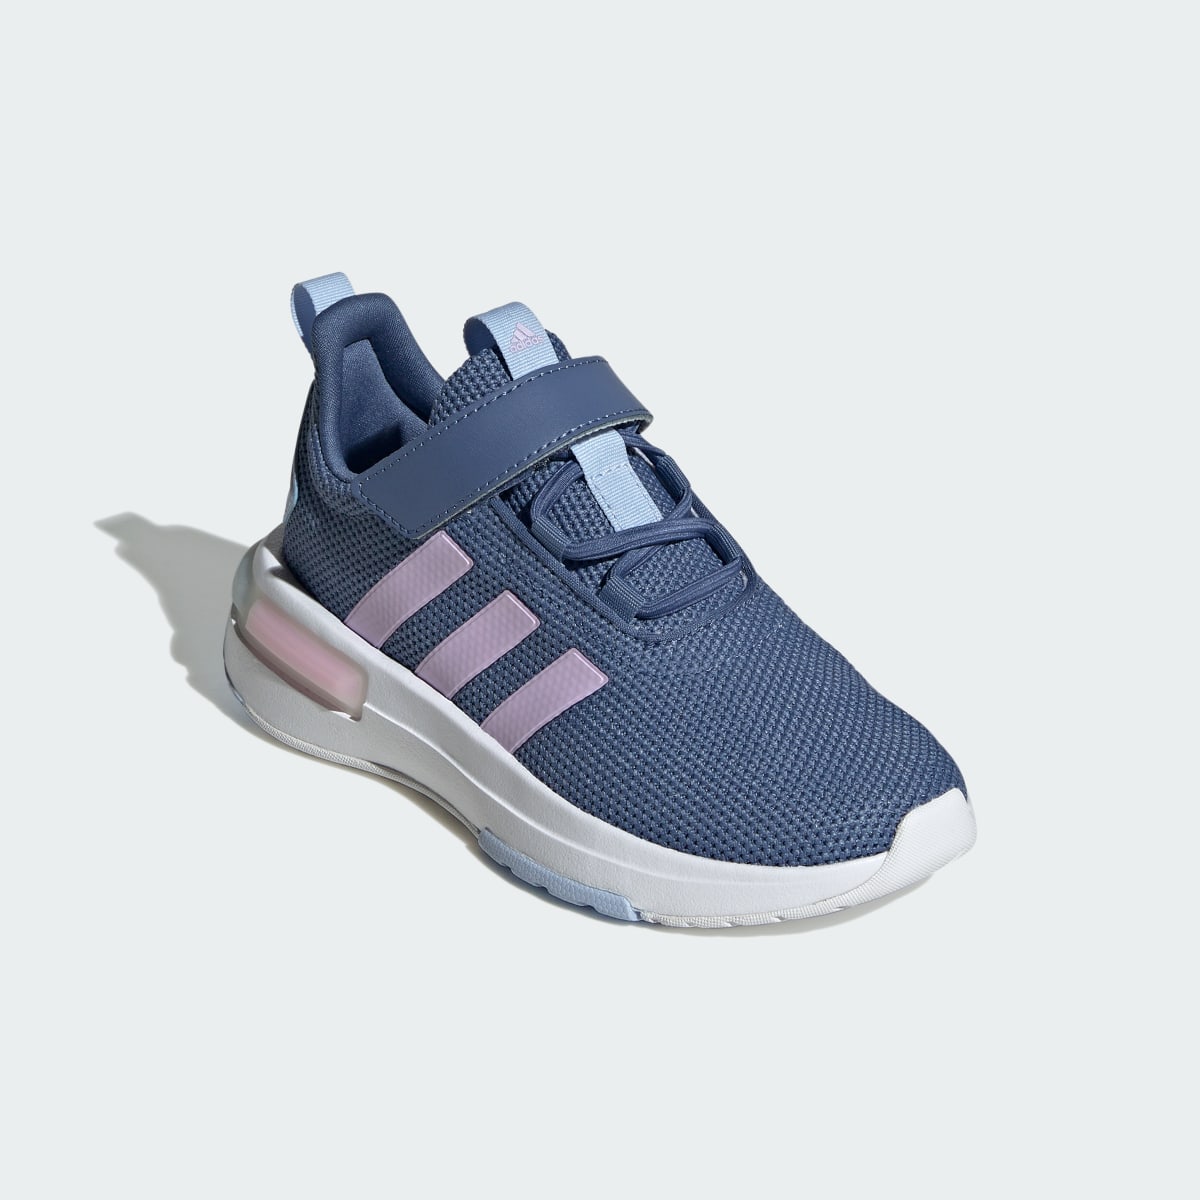 Adidas Racer TR23 Shoes Kids. 5